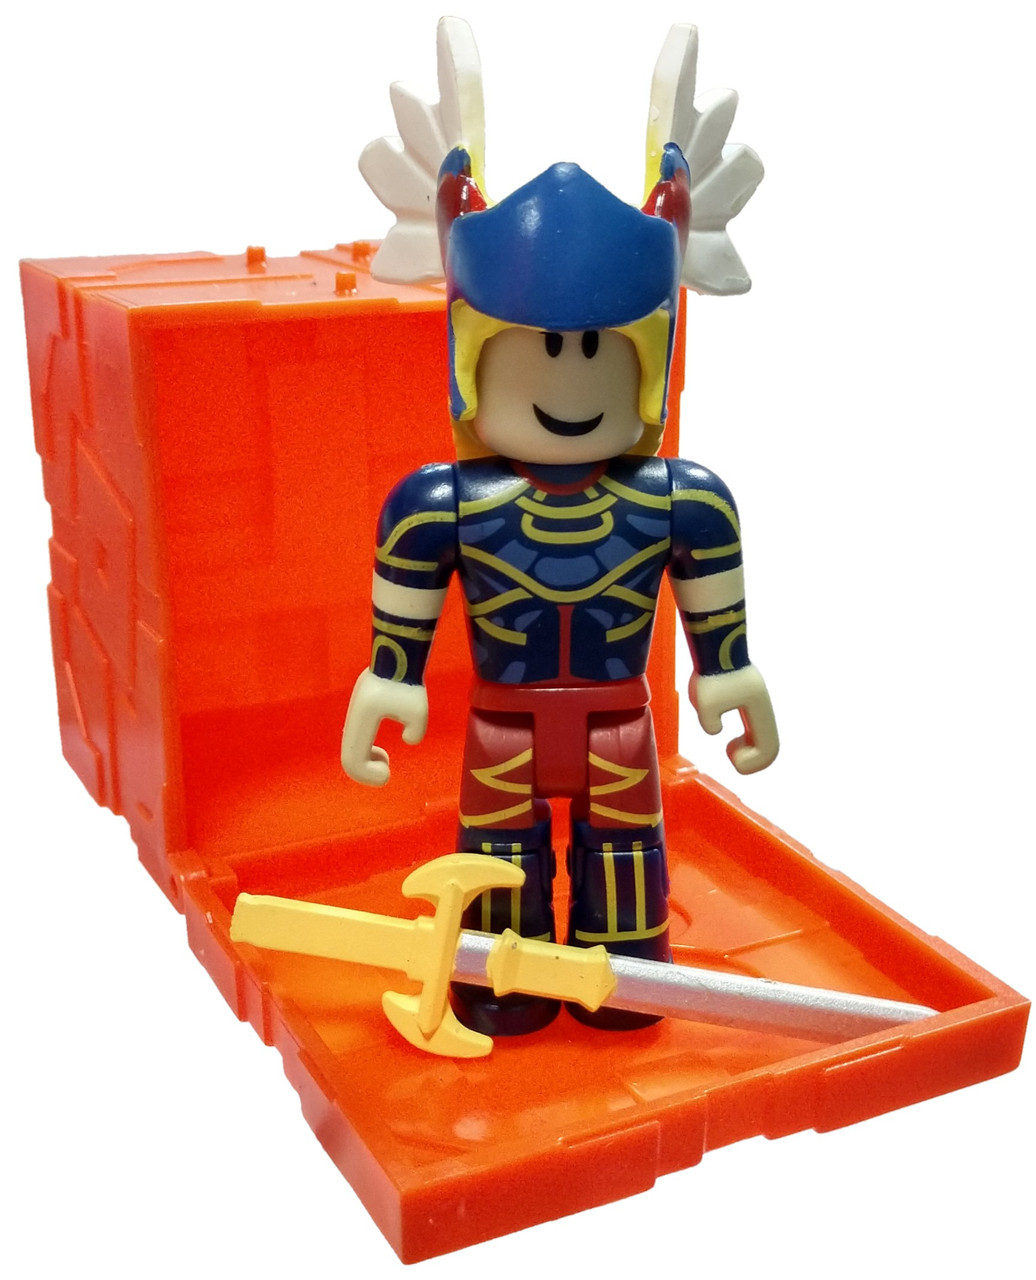 Roblox Series 6 Summoner Tycoon Valkyrie 3 Mini Figure With Orange Cube And Online Code Loose Jazwares Toywiz - roblox star destroyer tycoon